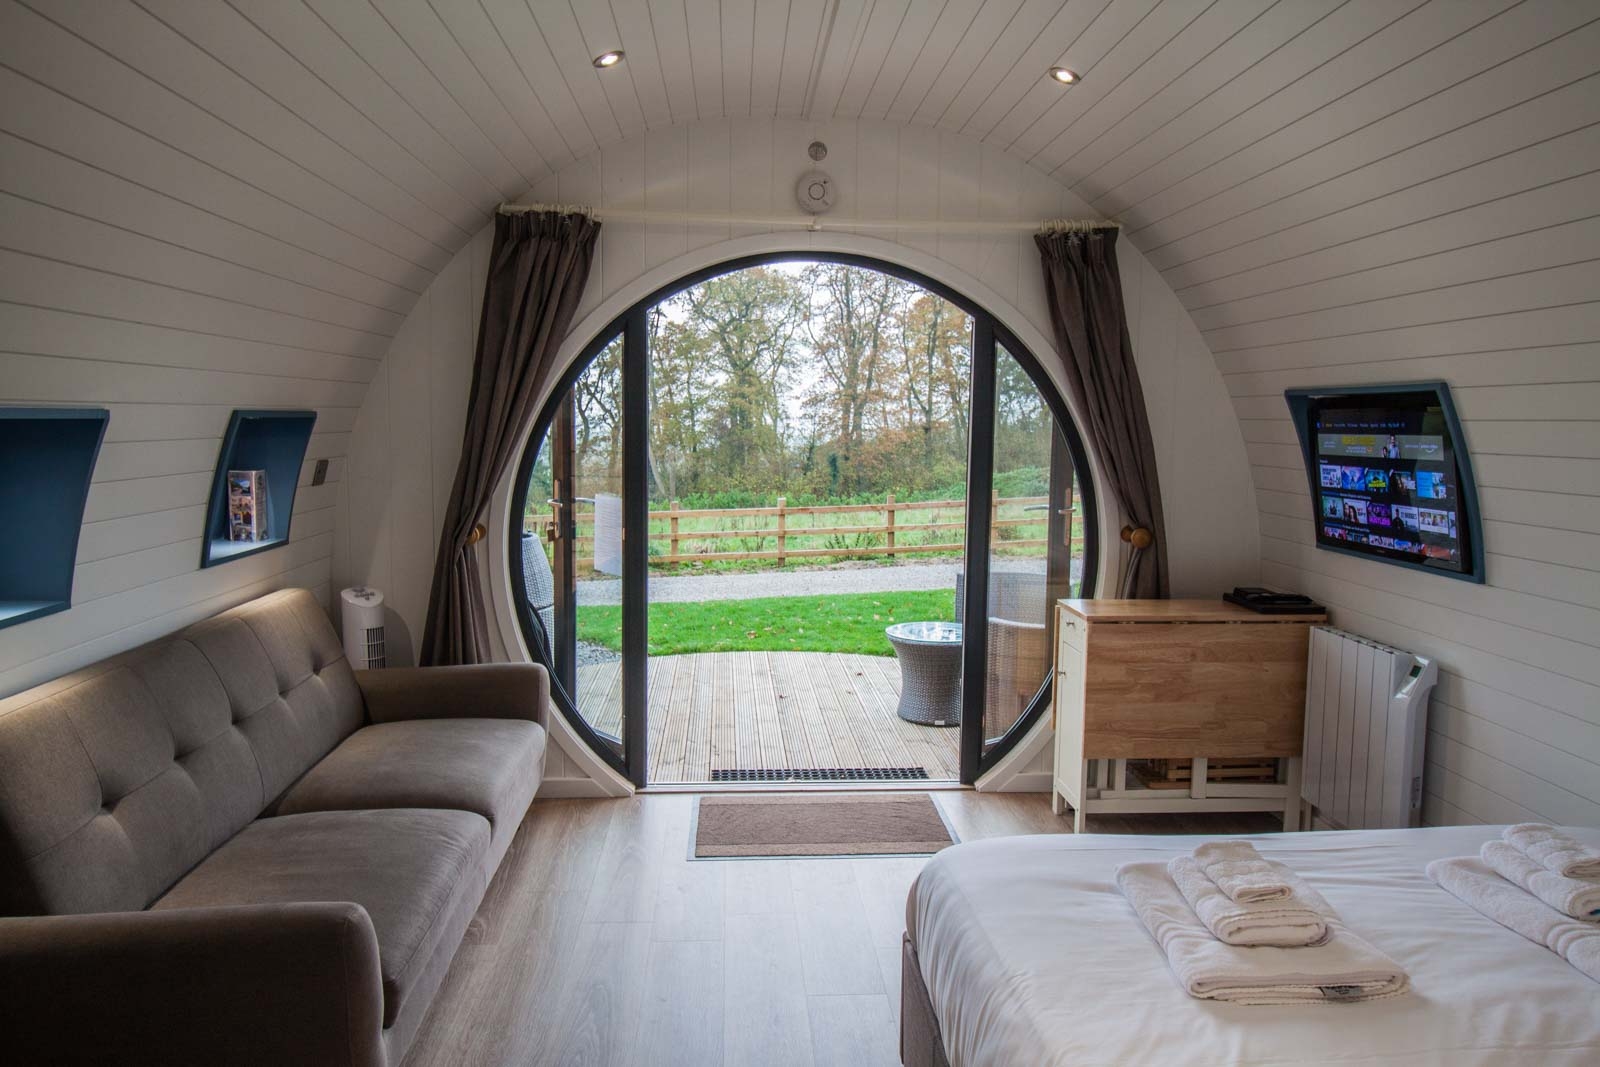 Glamping Pods - A Luxury Camping Experience in the Yarra Valley - My Poppet  L...
                                            </div>

                                        </div>

                                    </div>
                                </div>
                                
                                
                                    <div class=